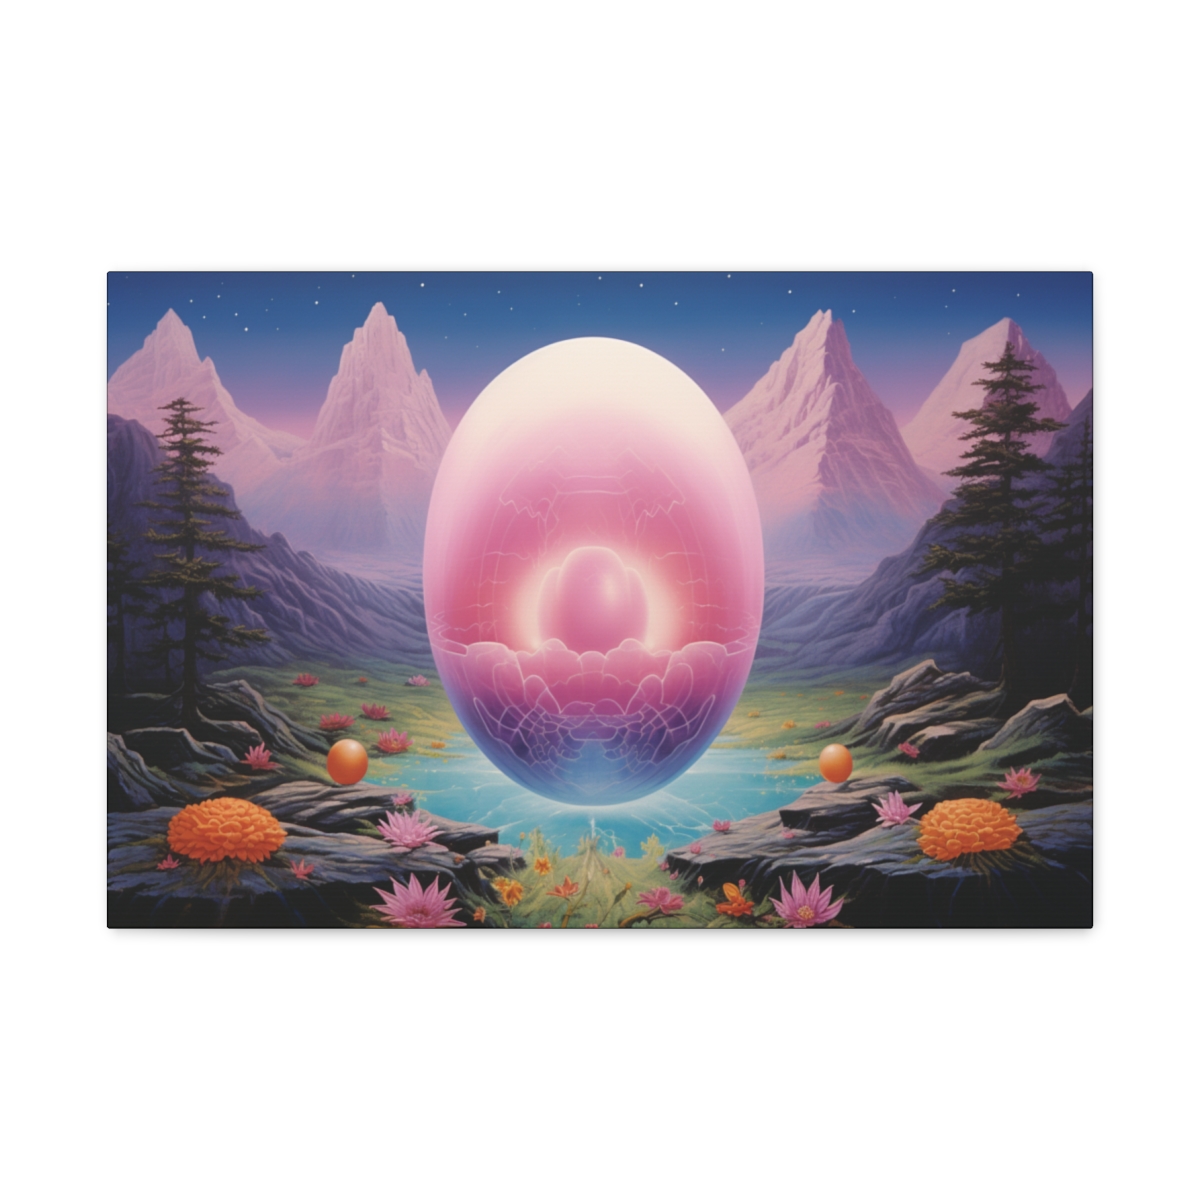 Spiritual Art: The Egg From Which Sprung The Cosmos